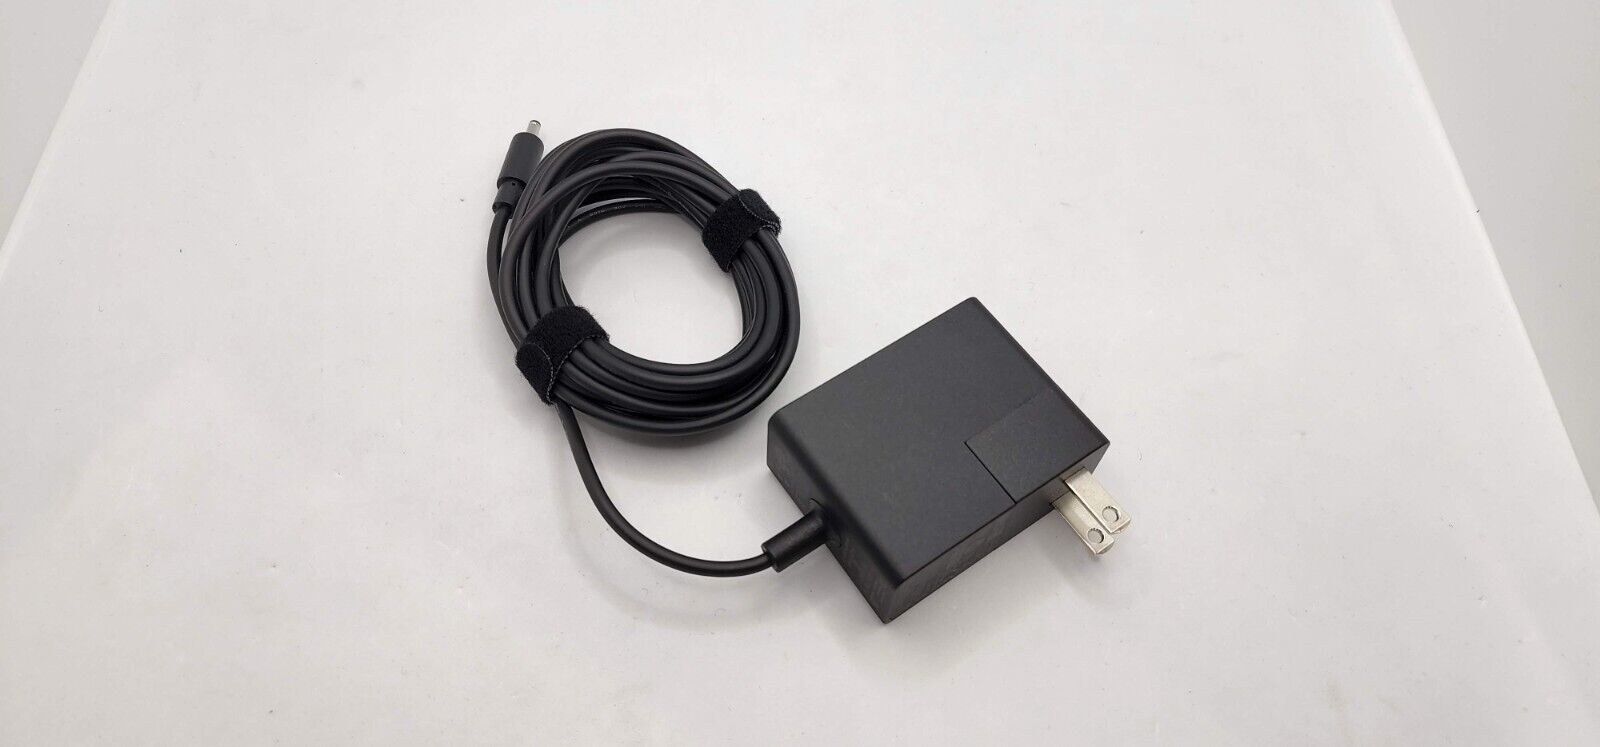 Genuine VALVE INDEX VR Headset AC Power Adapter Charger Supply Cable 181196-11 Brand: VALVE INDEX Type: PC & Console